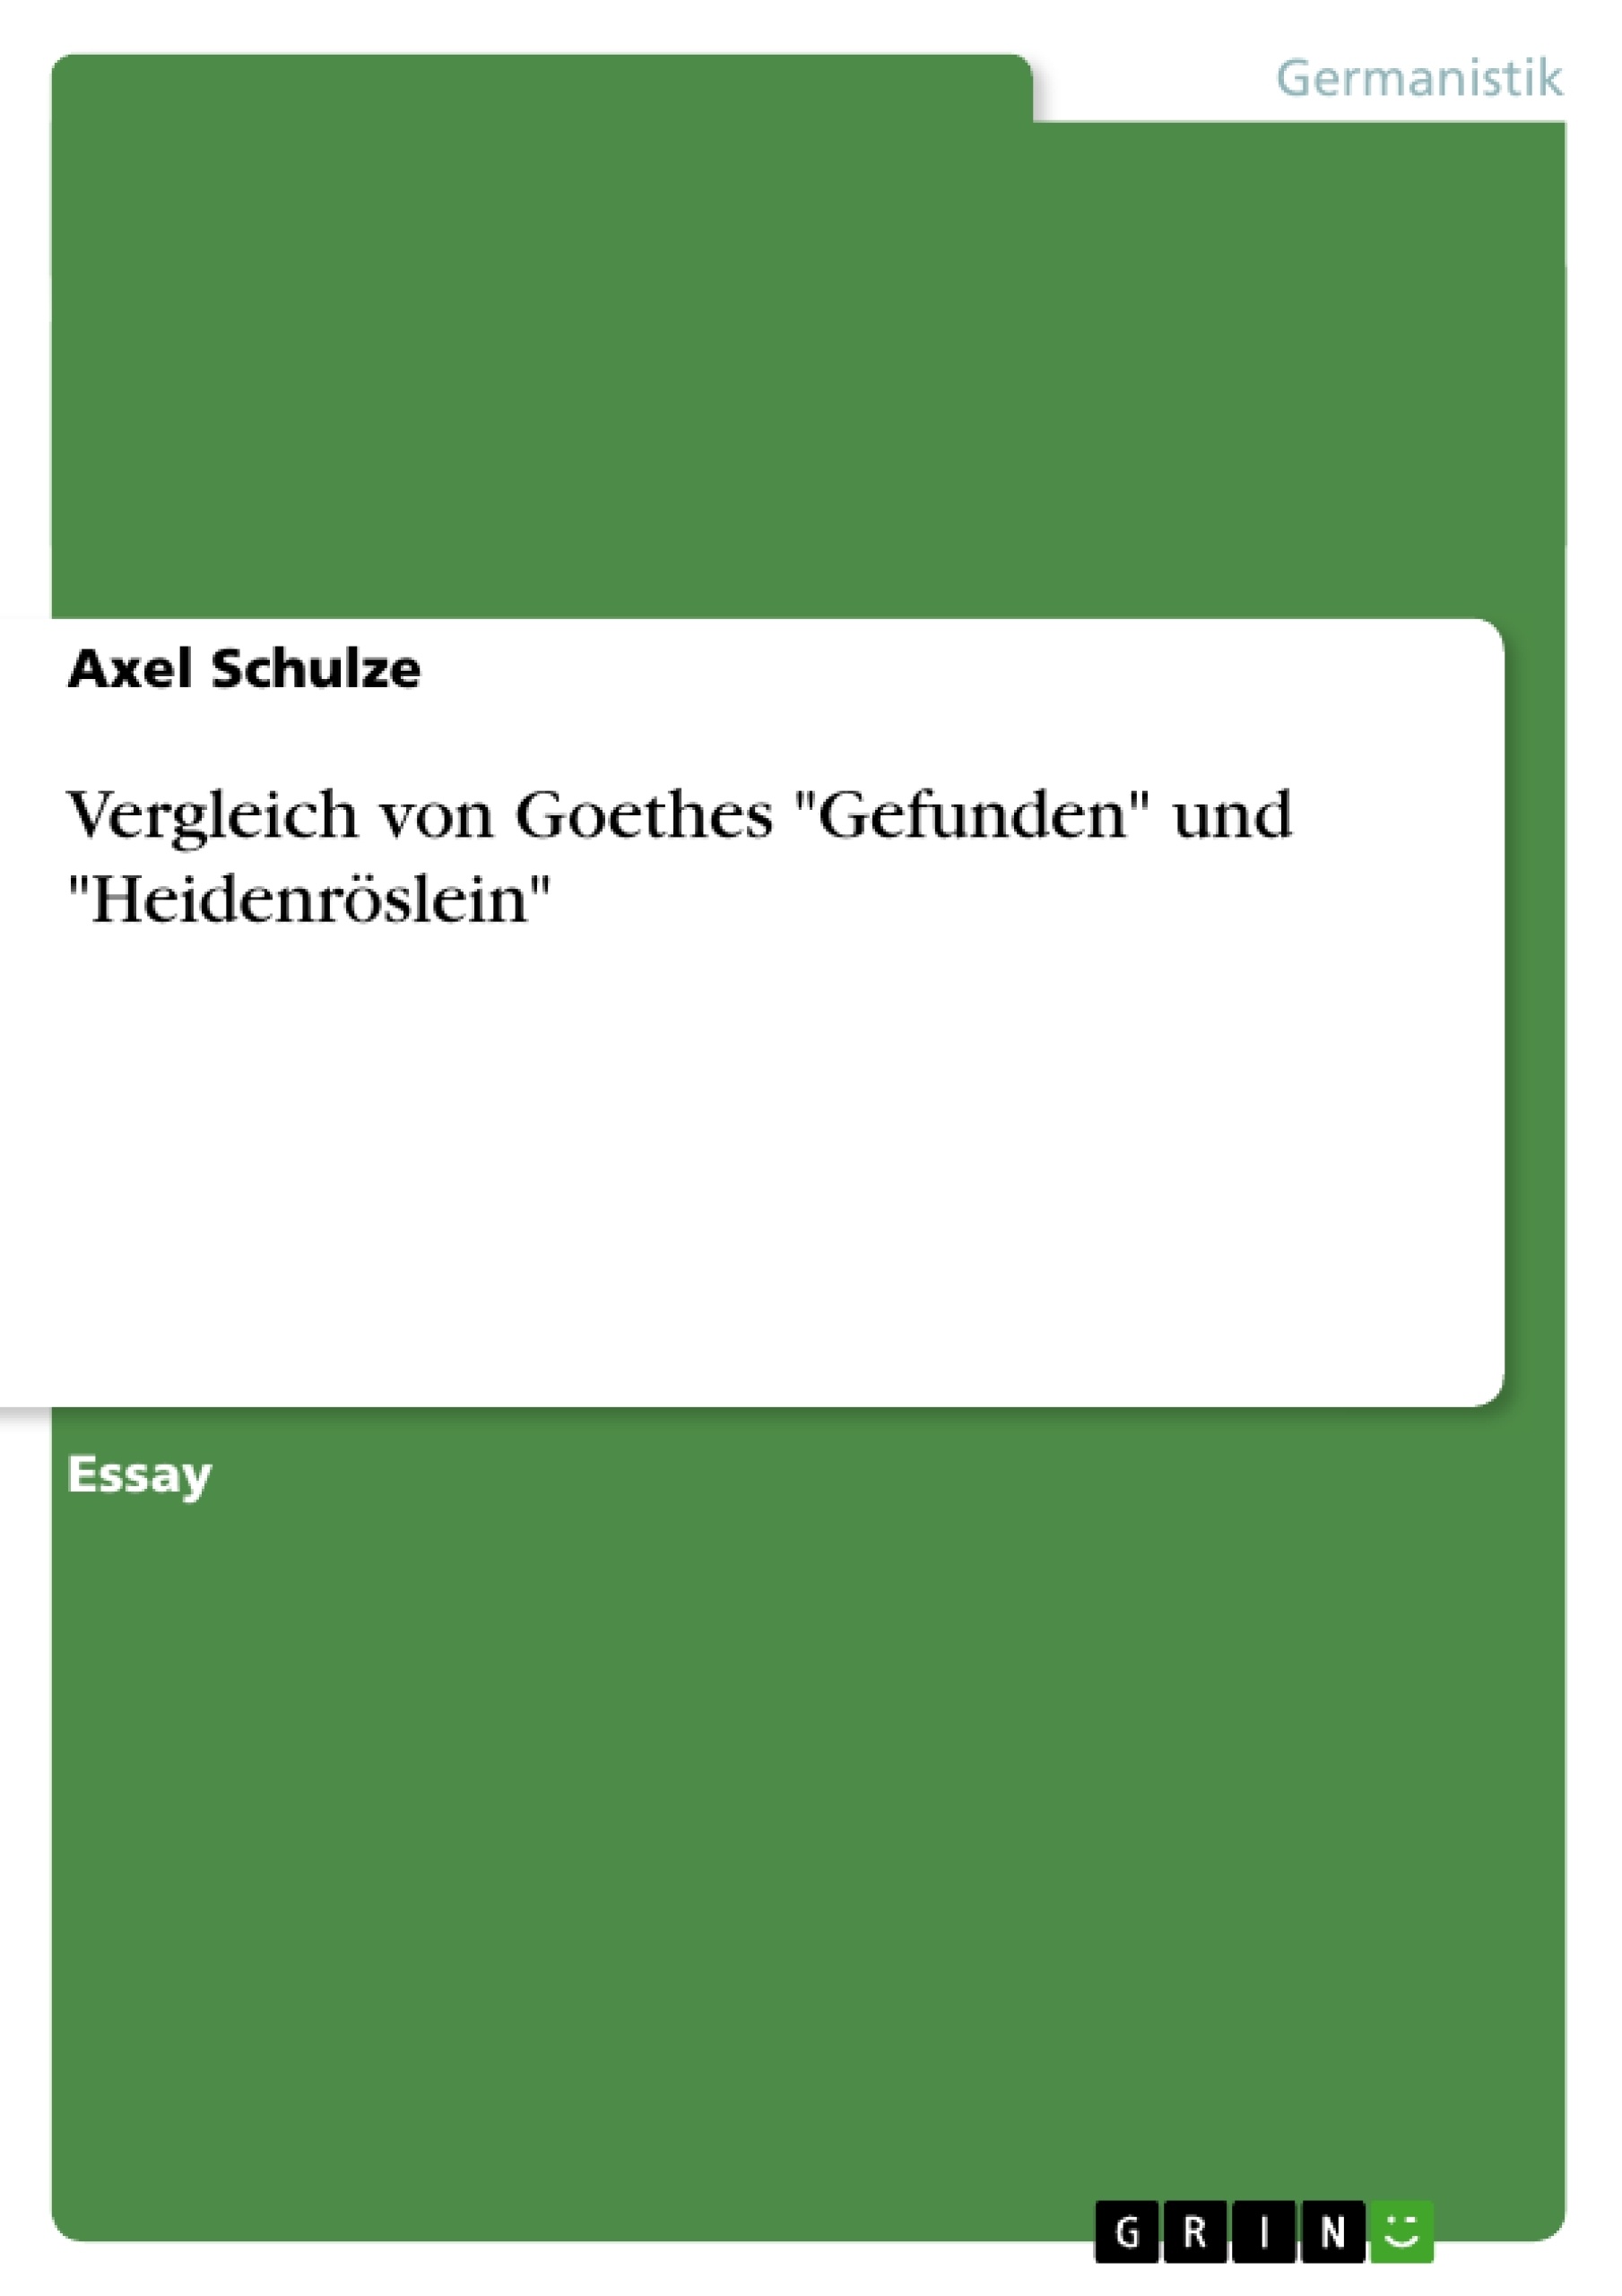 http://ausbildung-hp.de/book/book-transmission-lines-in-digital-systems-for-emc-practitioners/